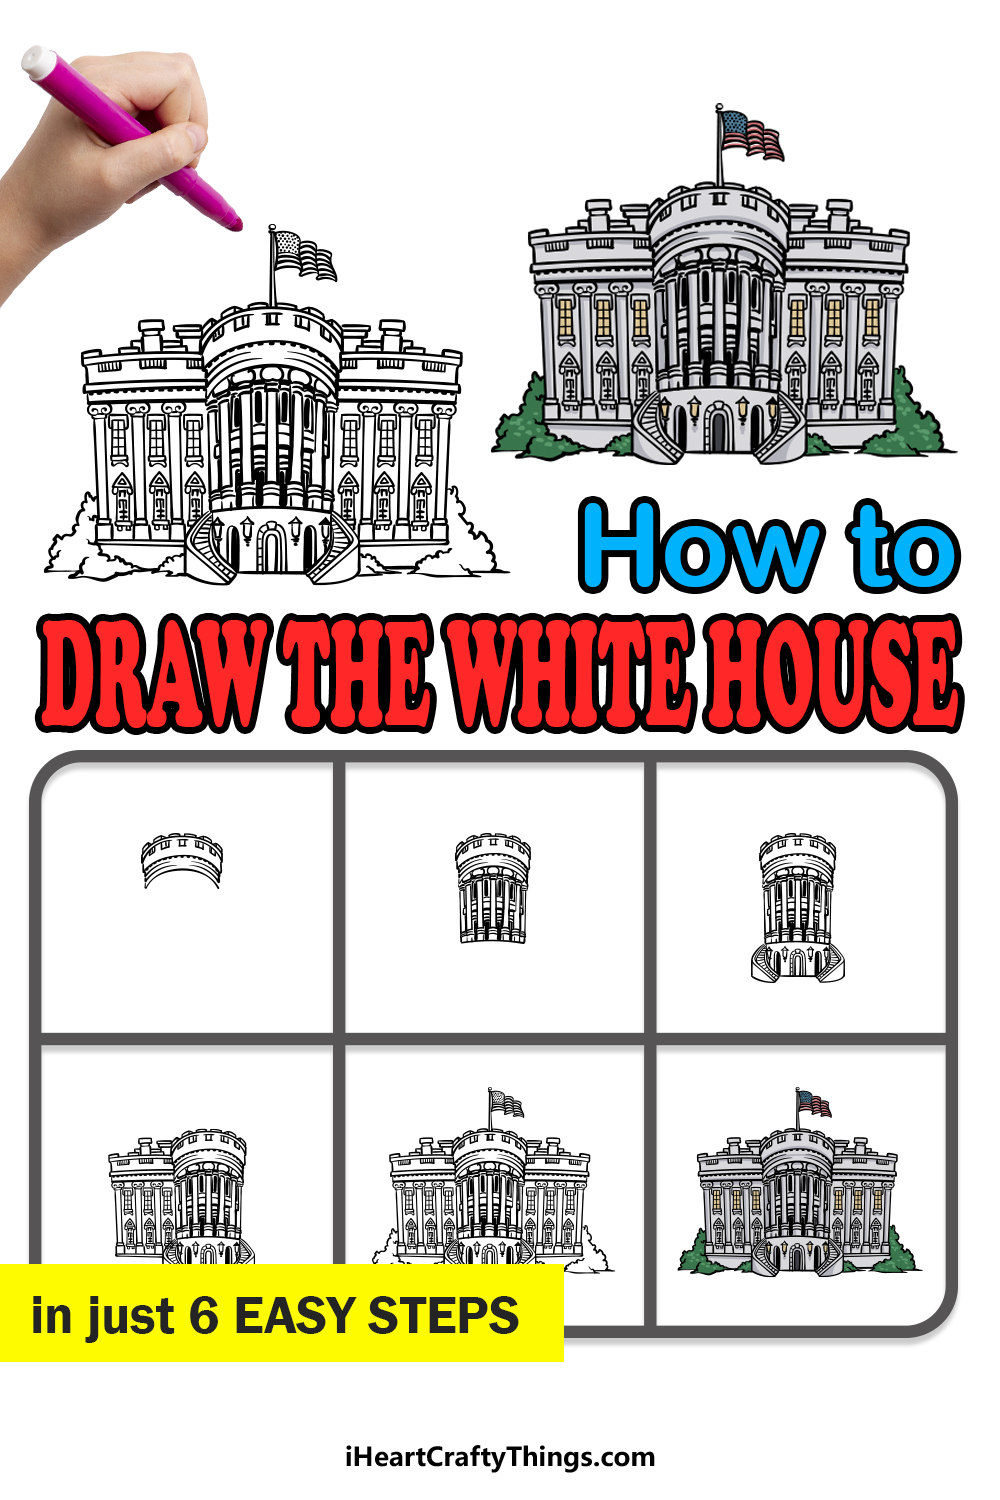 how to draw The White House in 6 easy steps